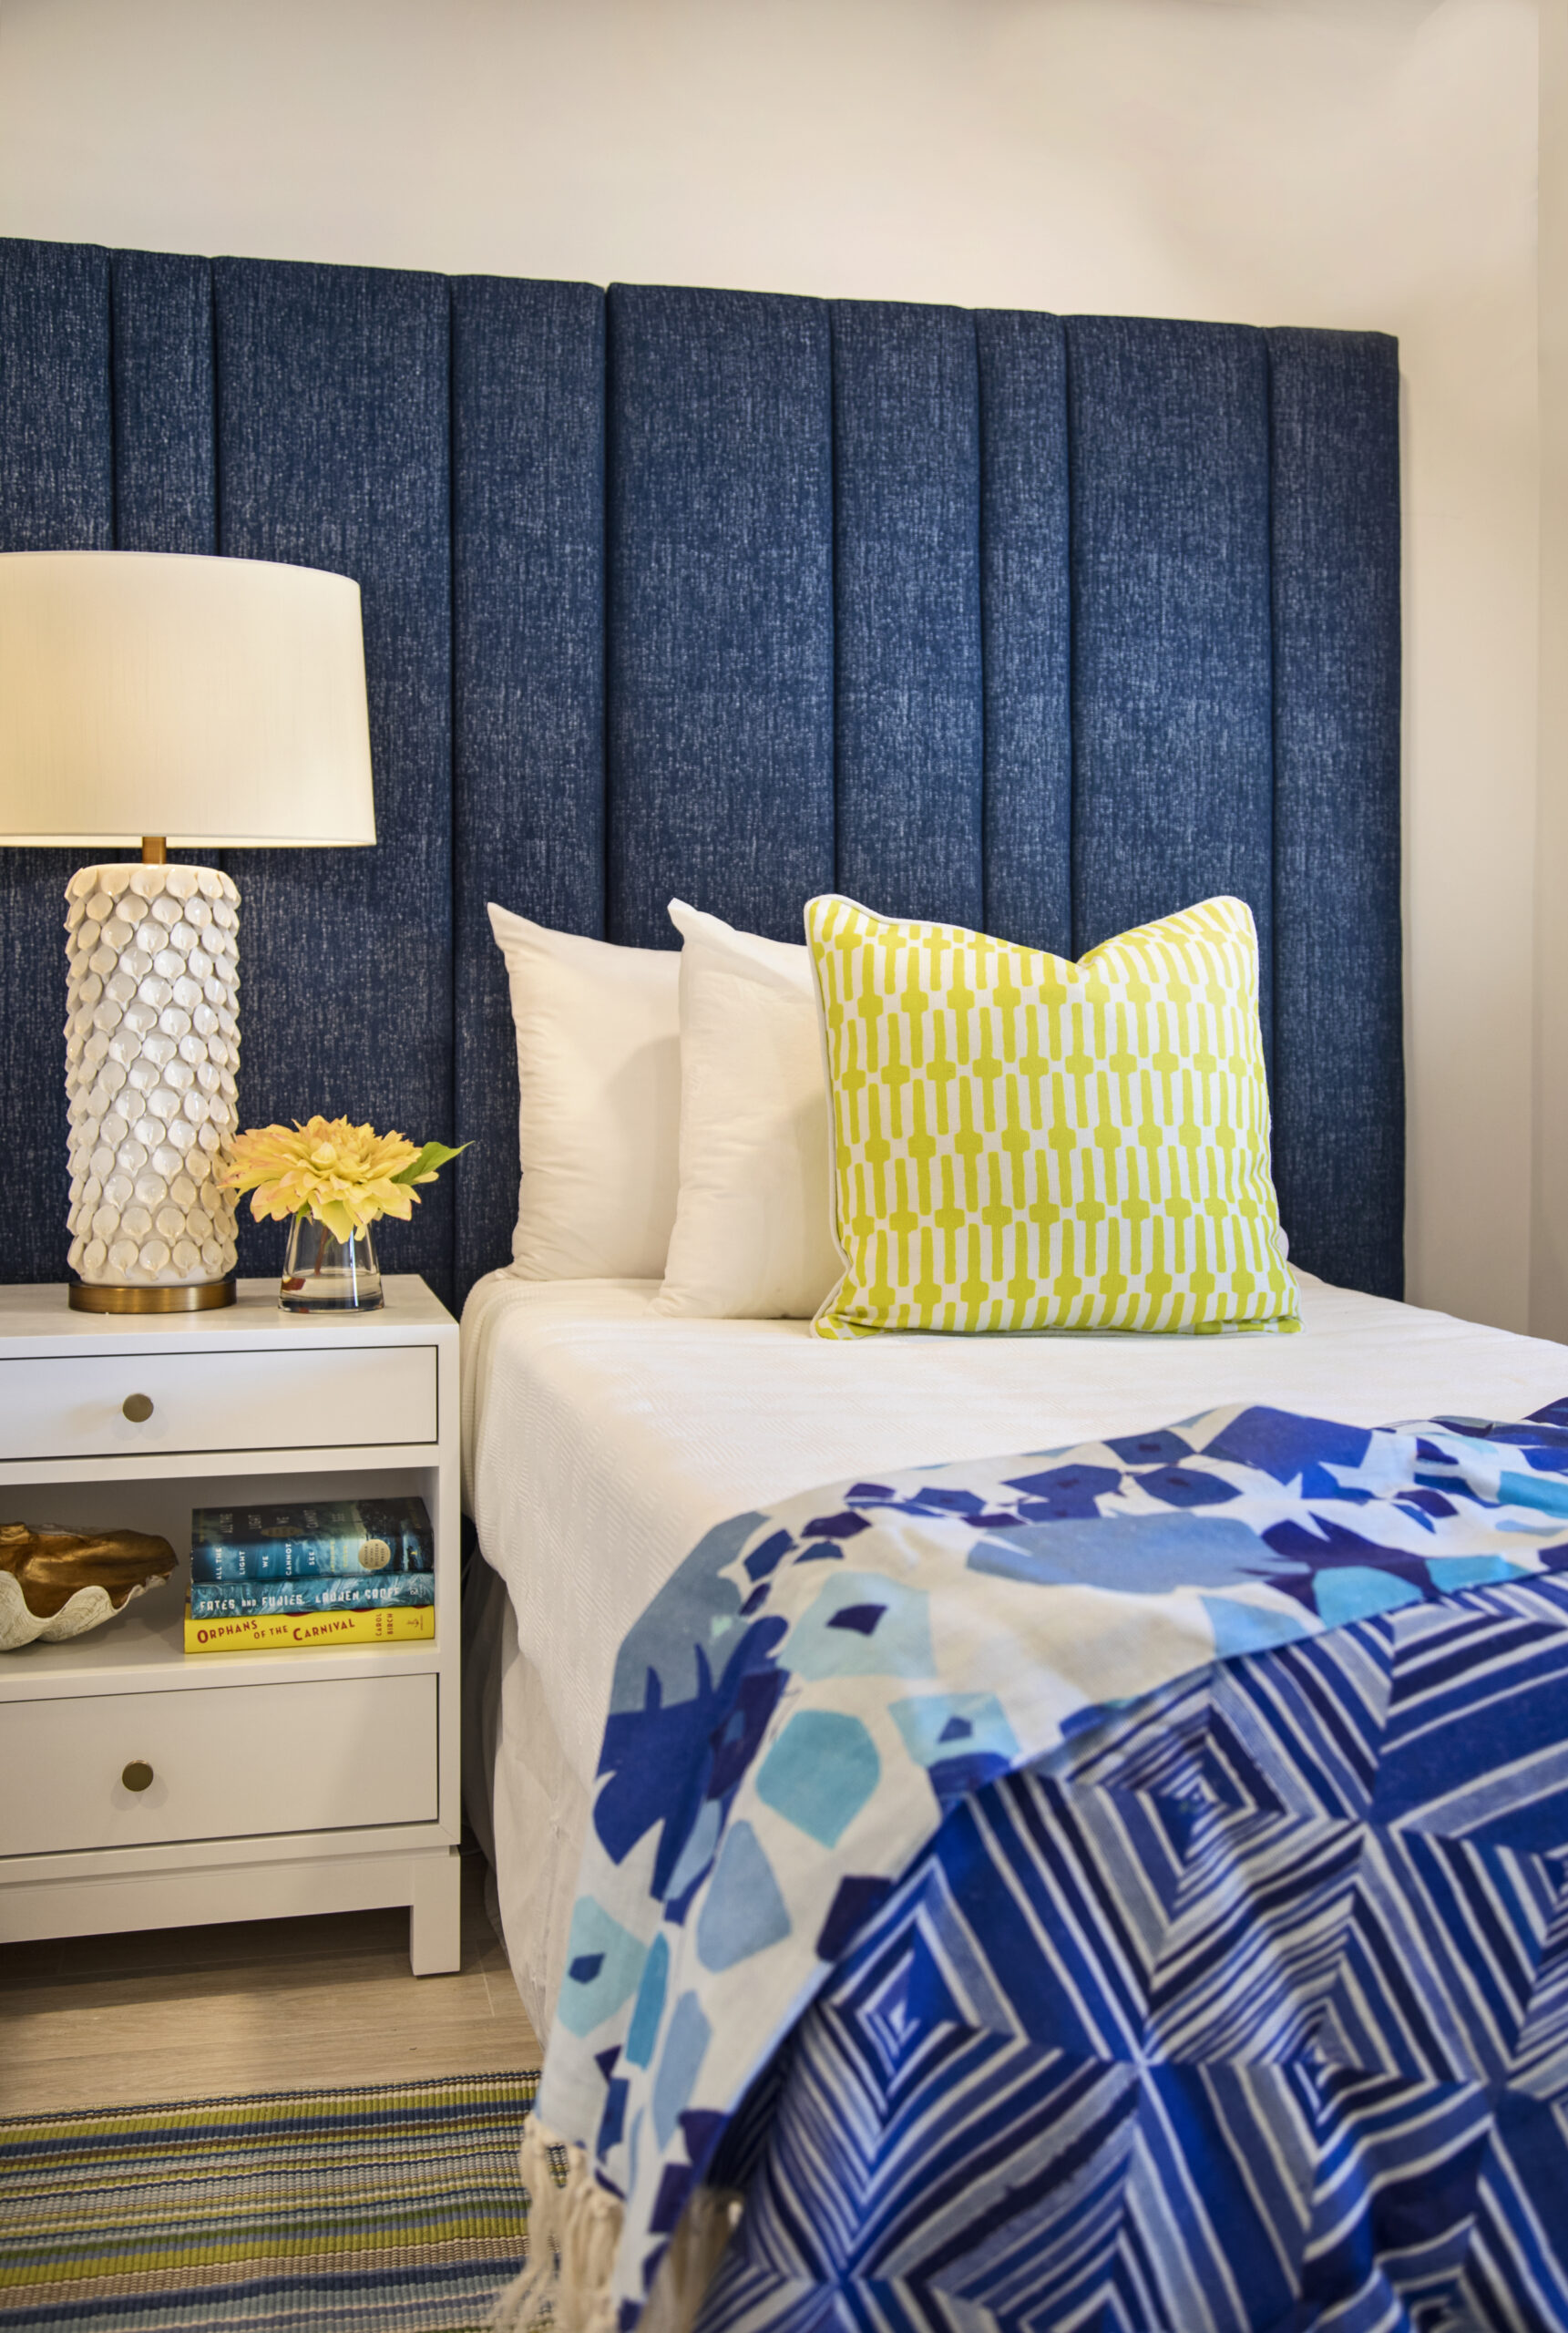 Island inspired bedroom design with a nightstand, lamp, and nautical headboard